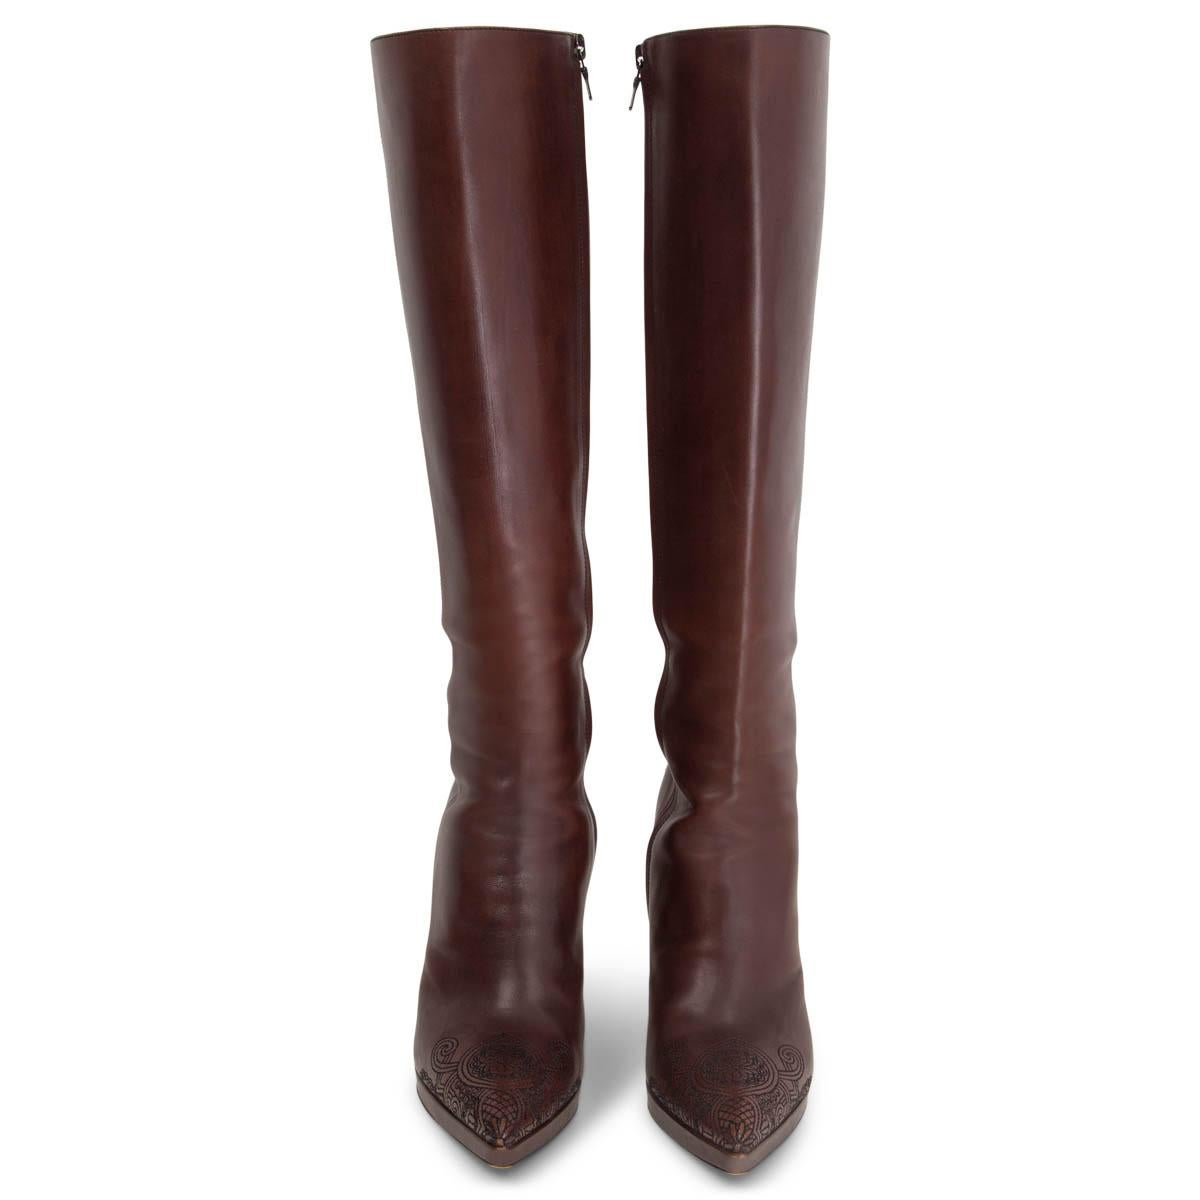 100% authentic Prada pointed-toe knee-high distressed boots in brown calfskin with embroidered tip and heel. Open with a zipper on the inside. Have been worn and are in excellent condition. 

Measurements
Imprinted Size	37.5
Shoe Size	37.5
Inside